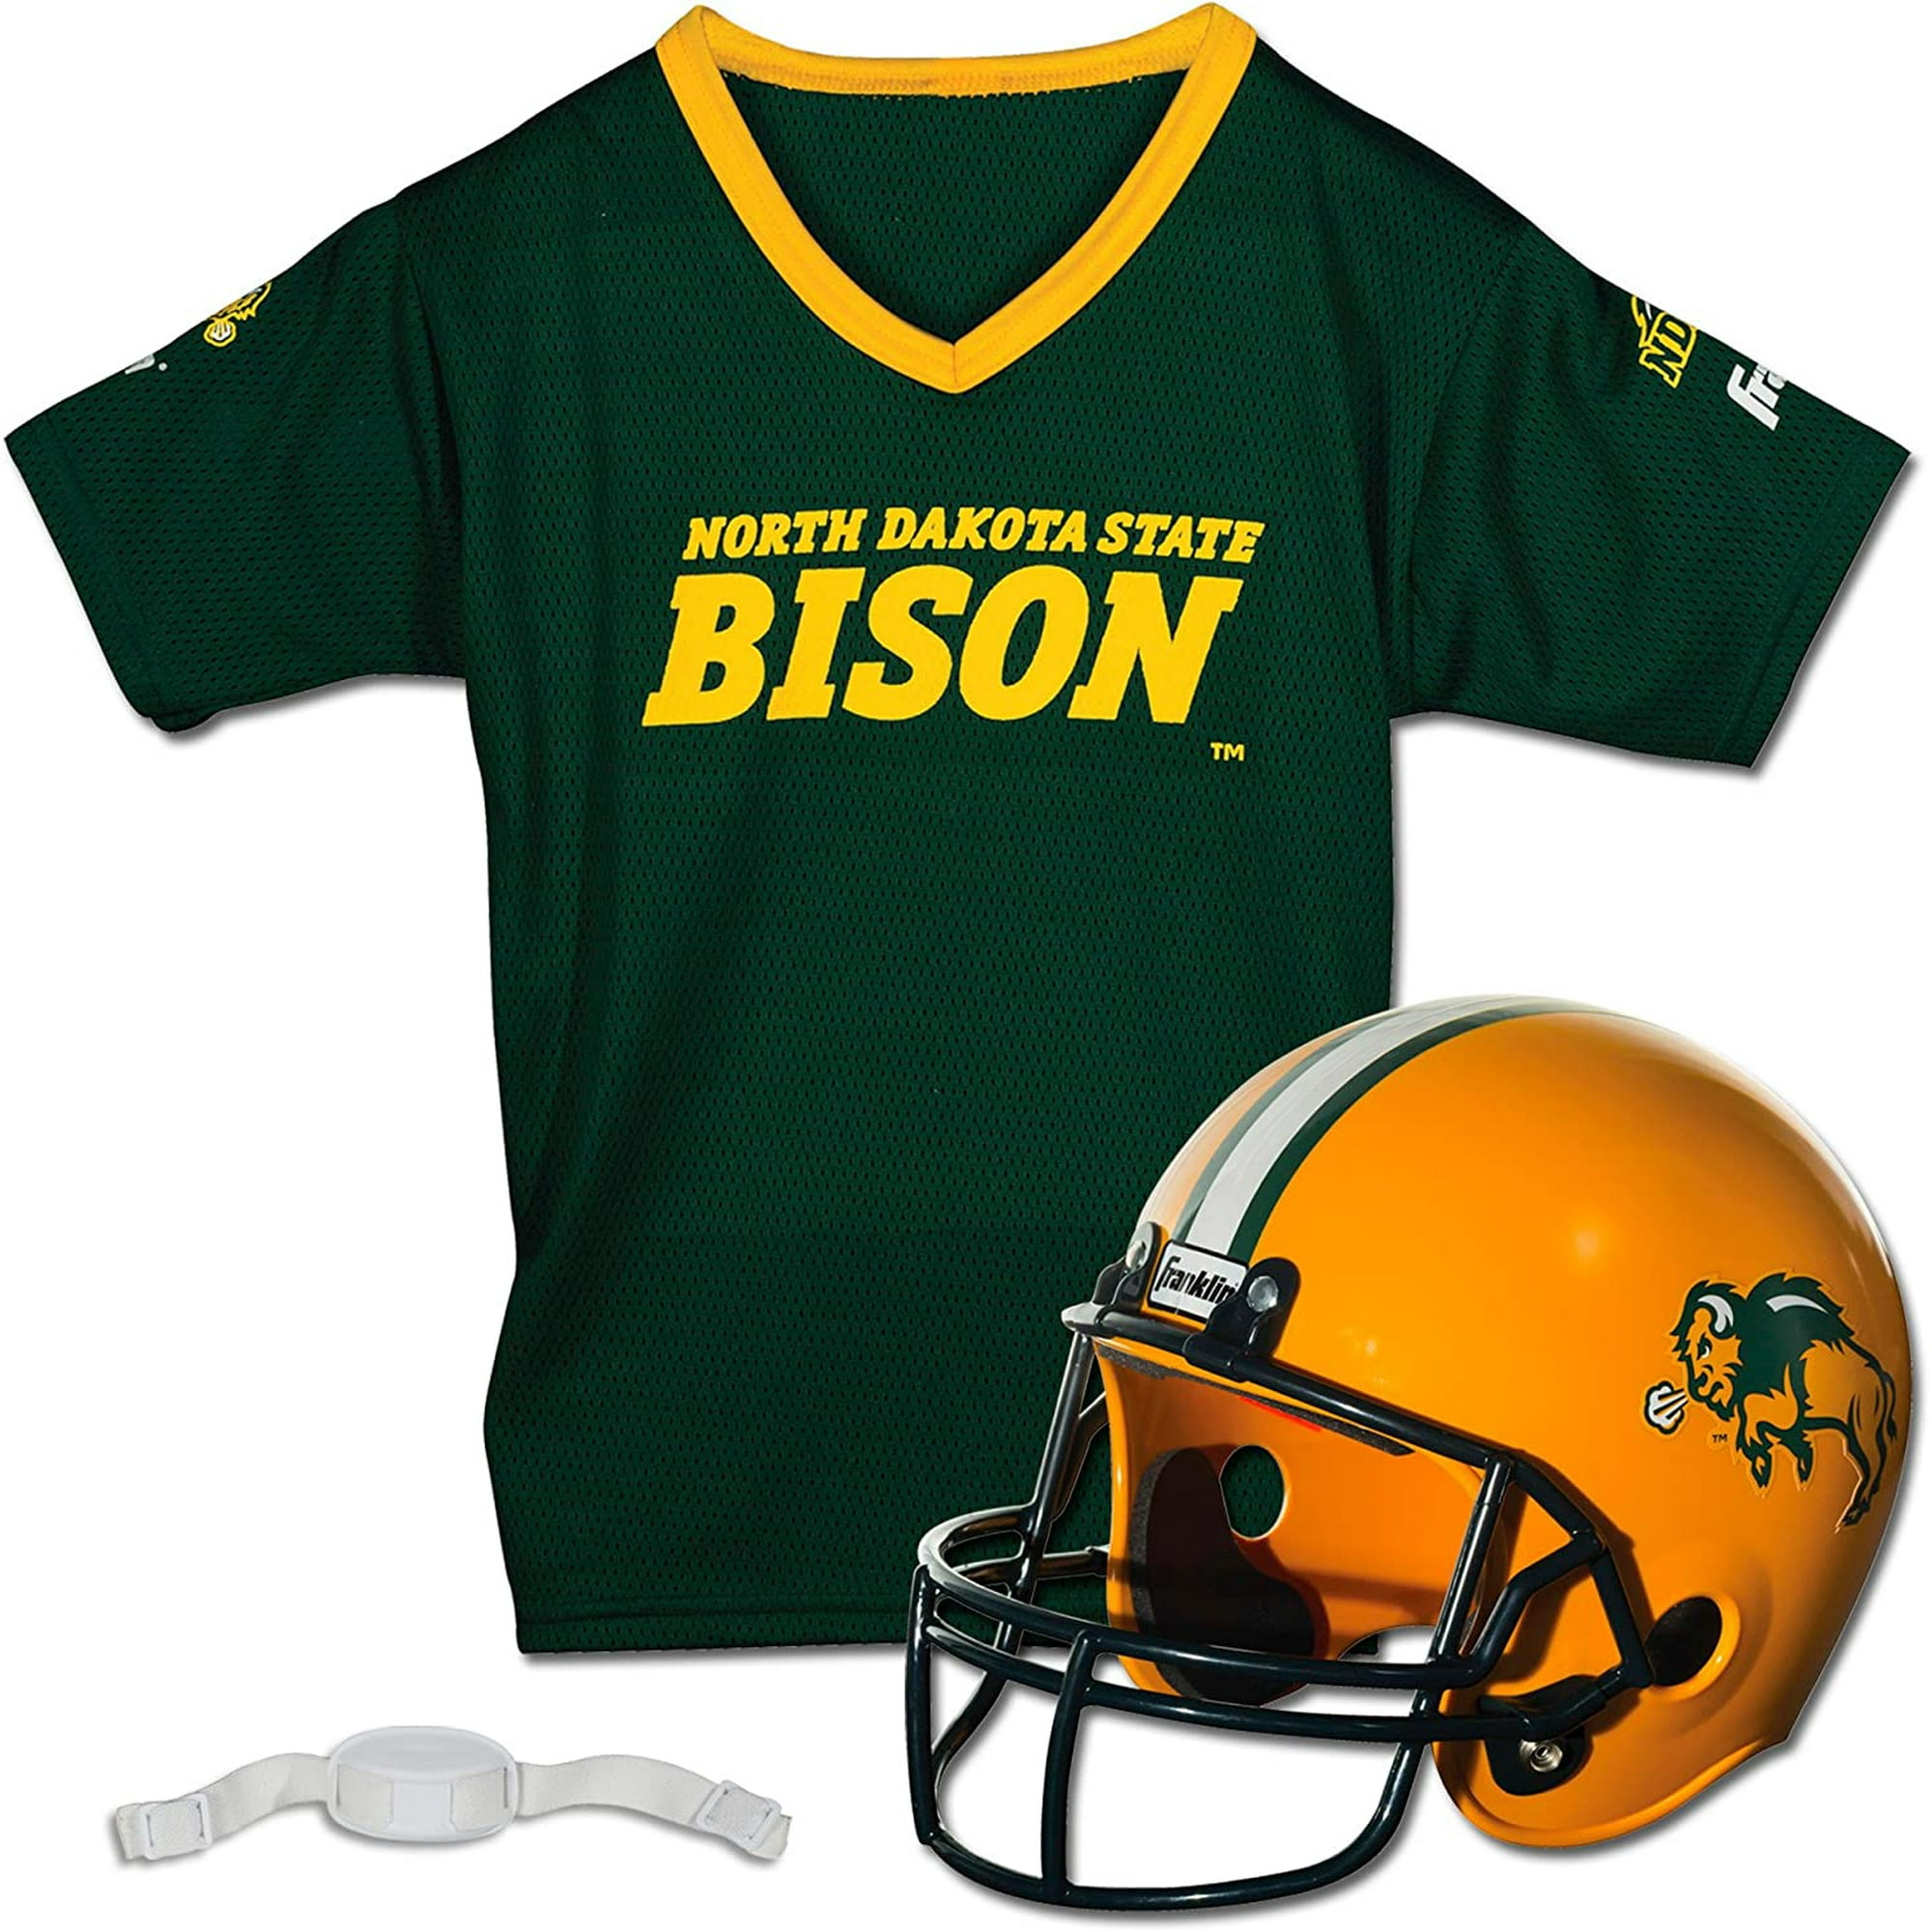 Wholesale youth football uniforms